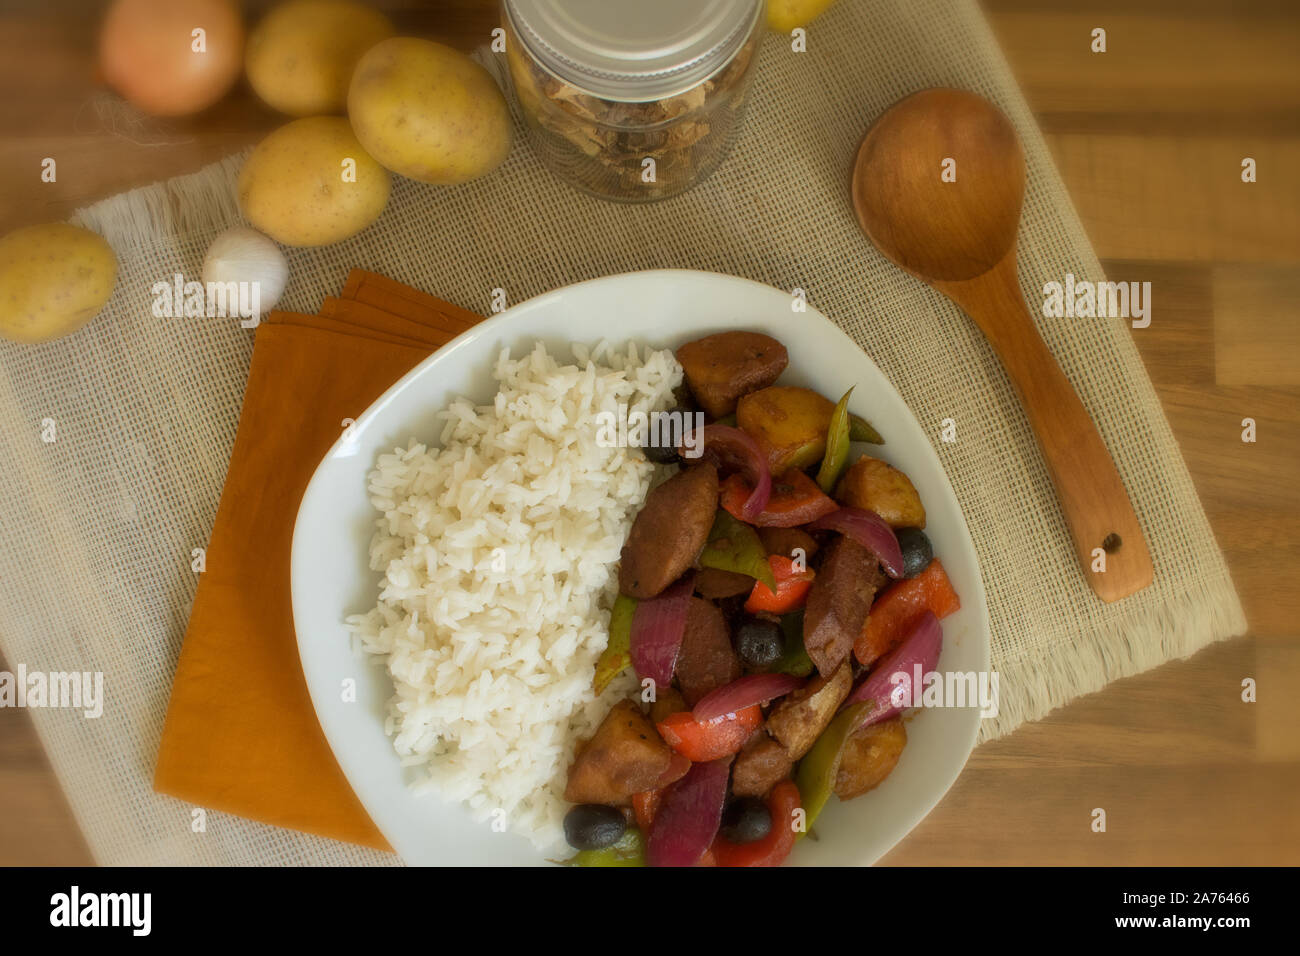 Vector illustration of a stir fry with vegetables, sausage and rice Stock Photo